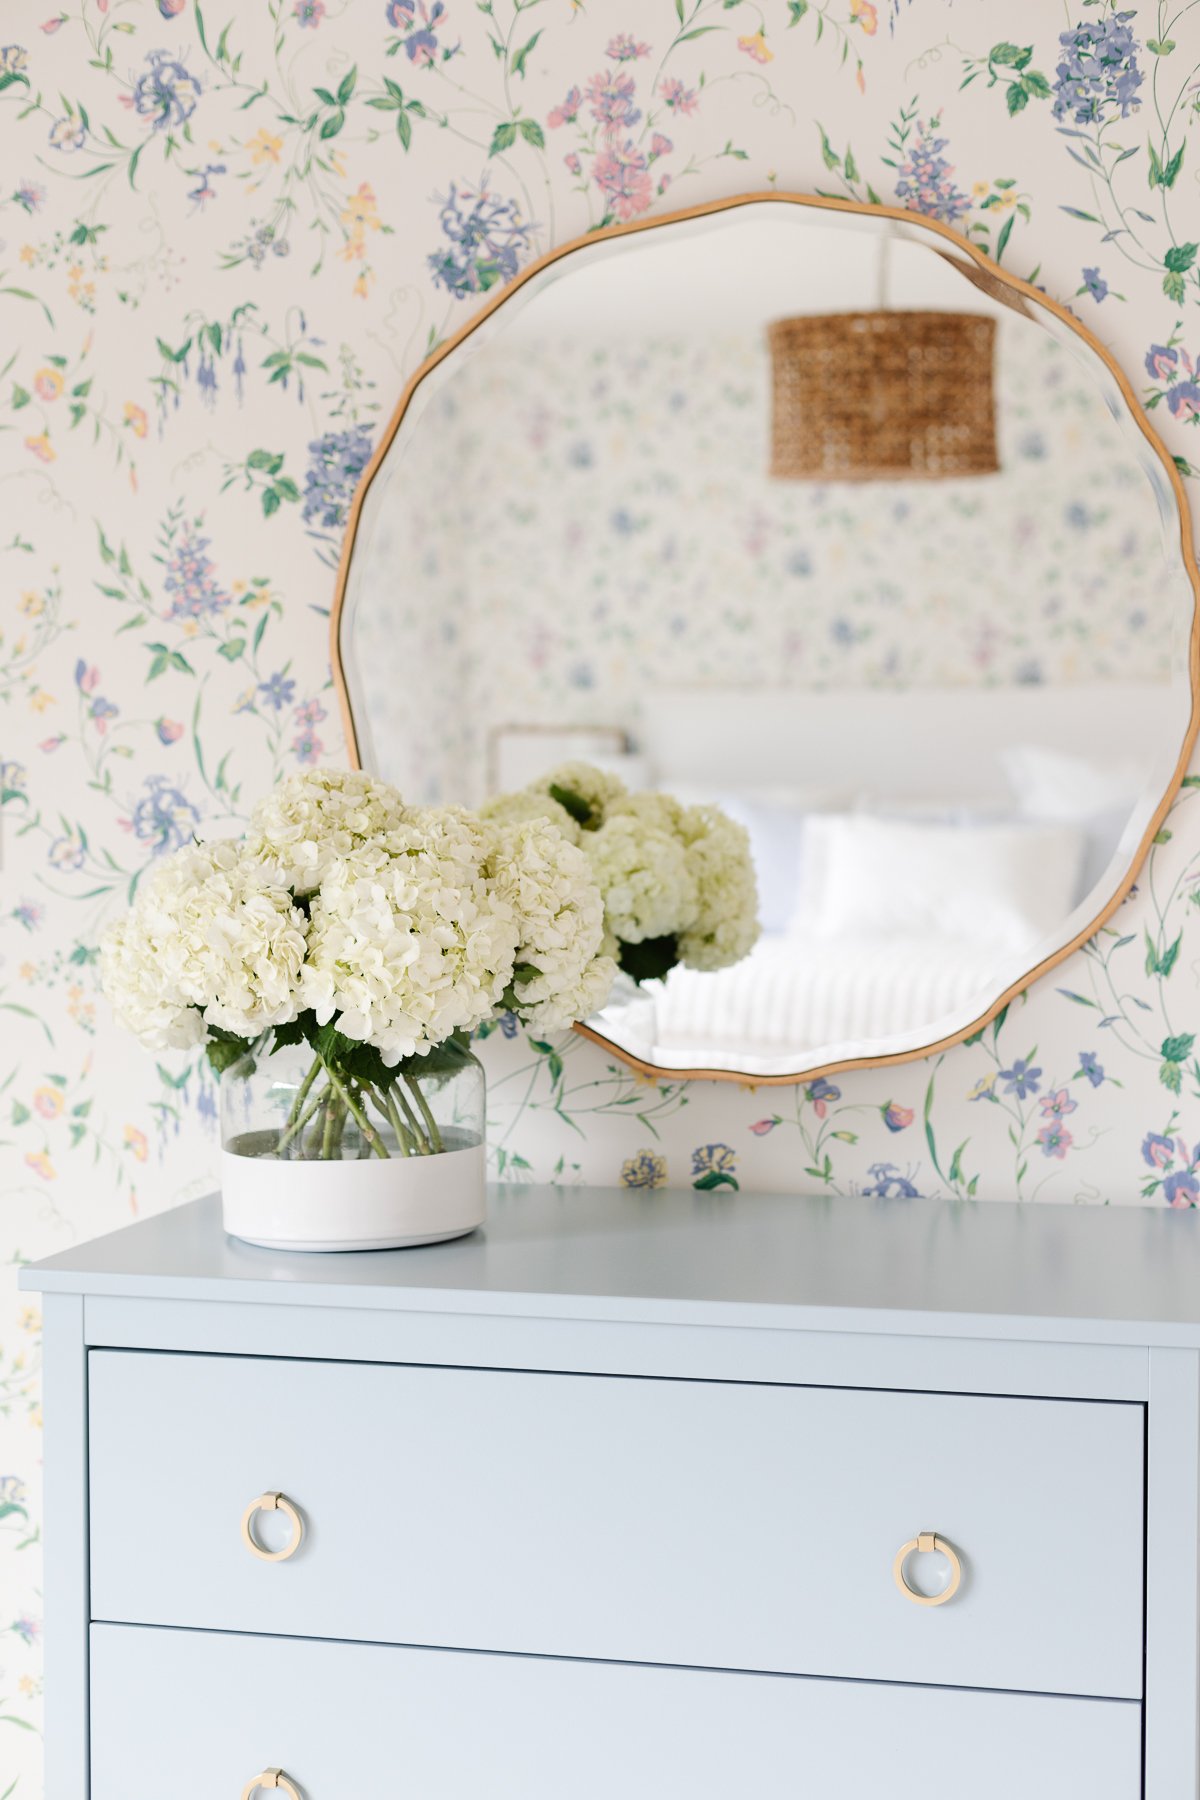 A guest bedroom with flowered wallpaper, a wavy mirror and flowers on top of a blue dresser.